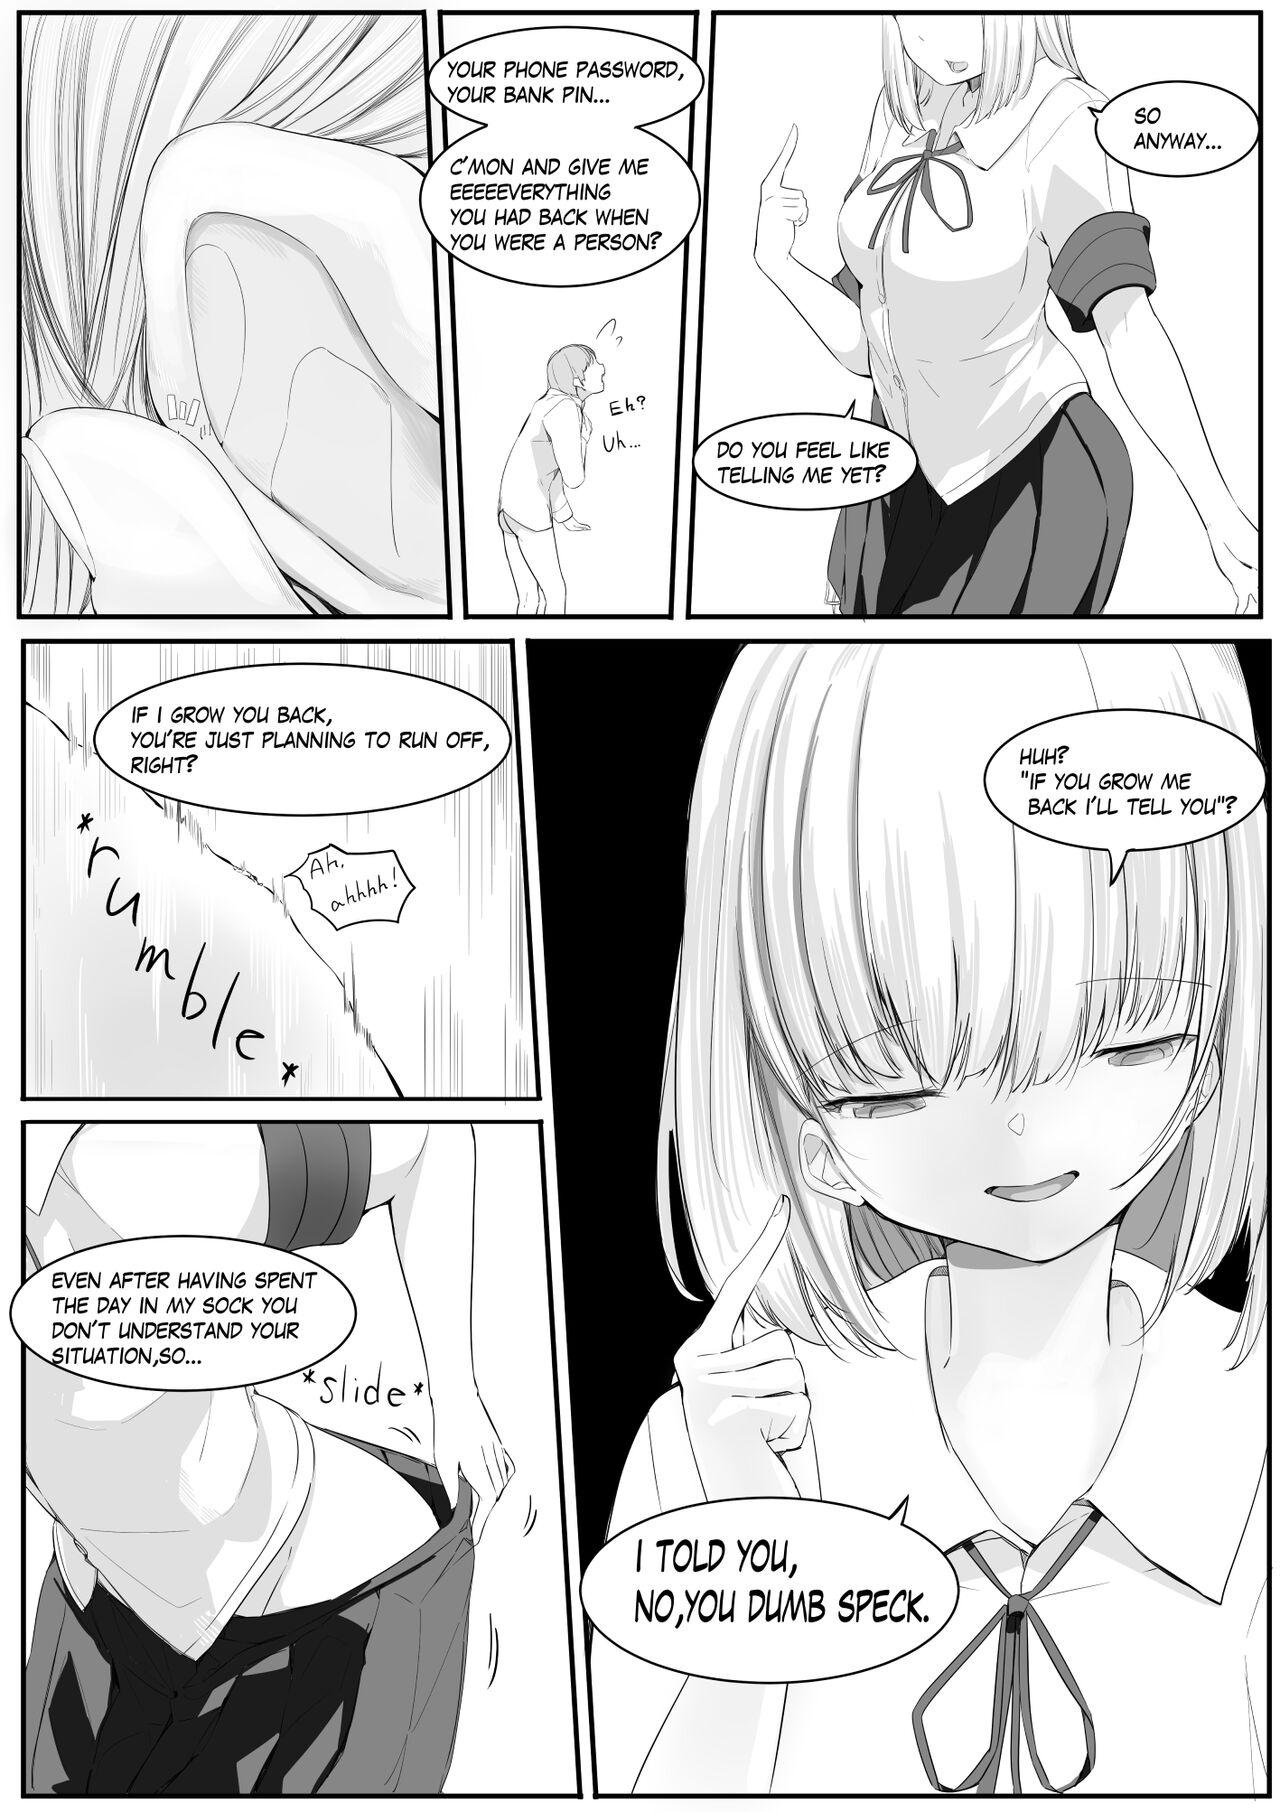 Fist Cheeky JK Shrinks Me Down And Takes Everything From Me. Analfucking - Page 3